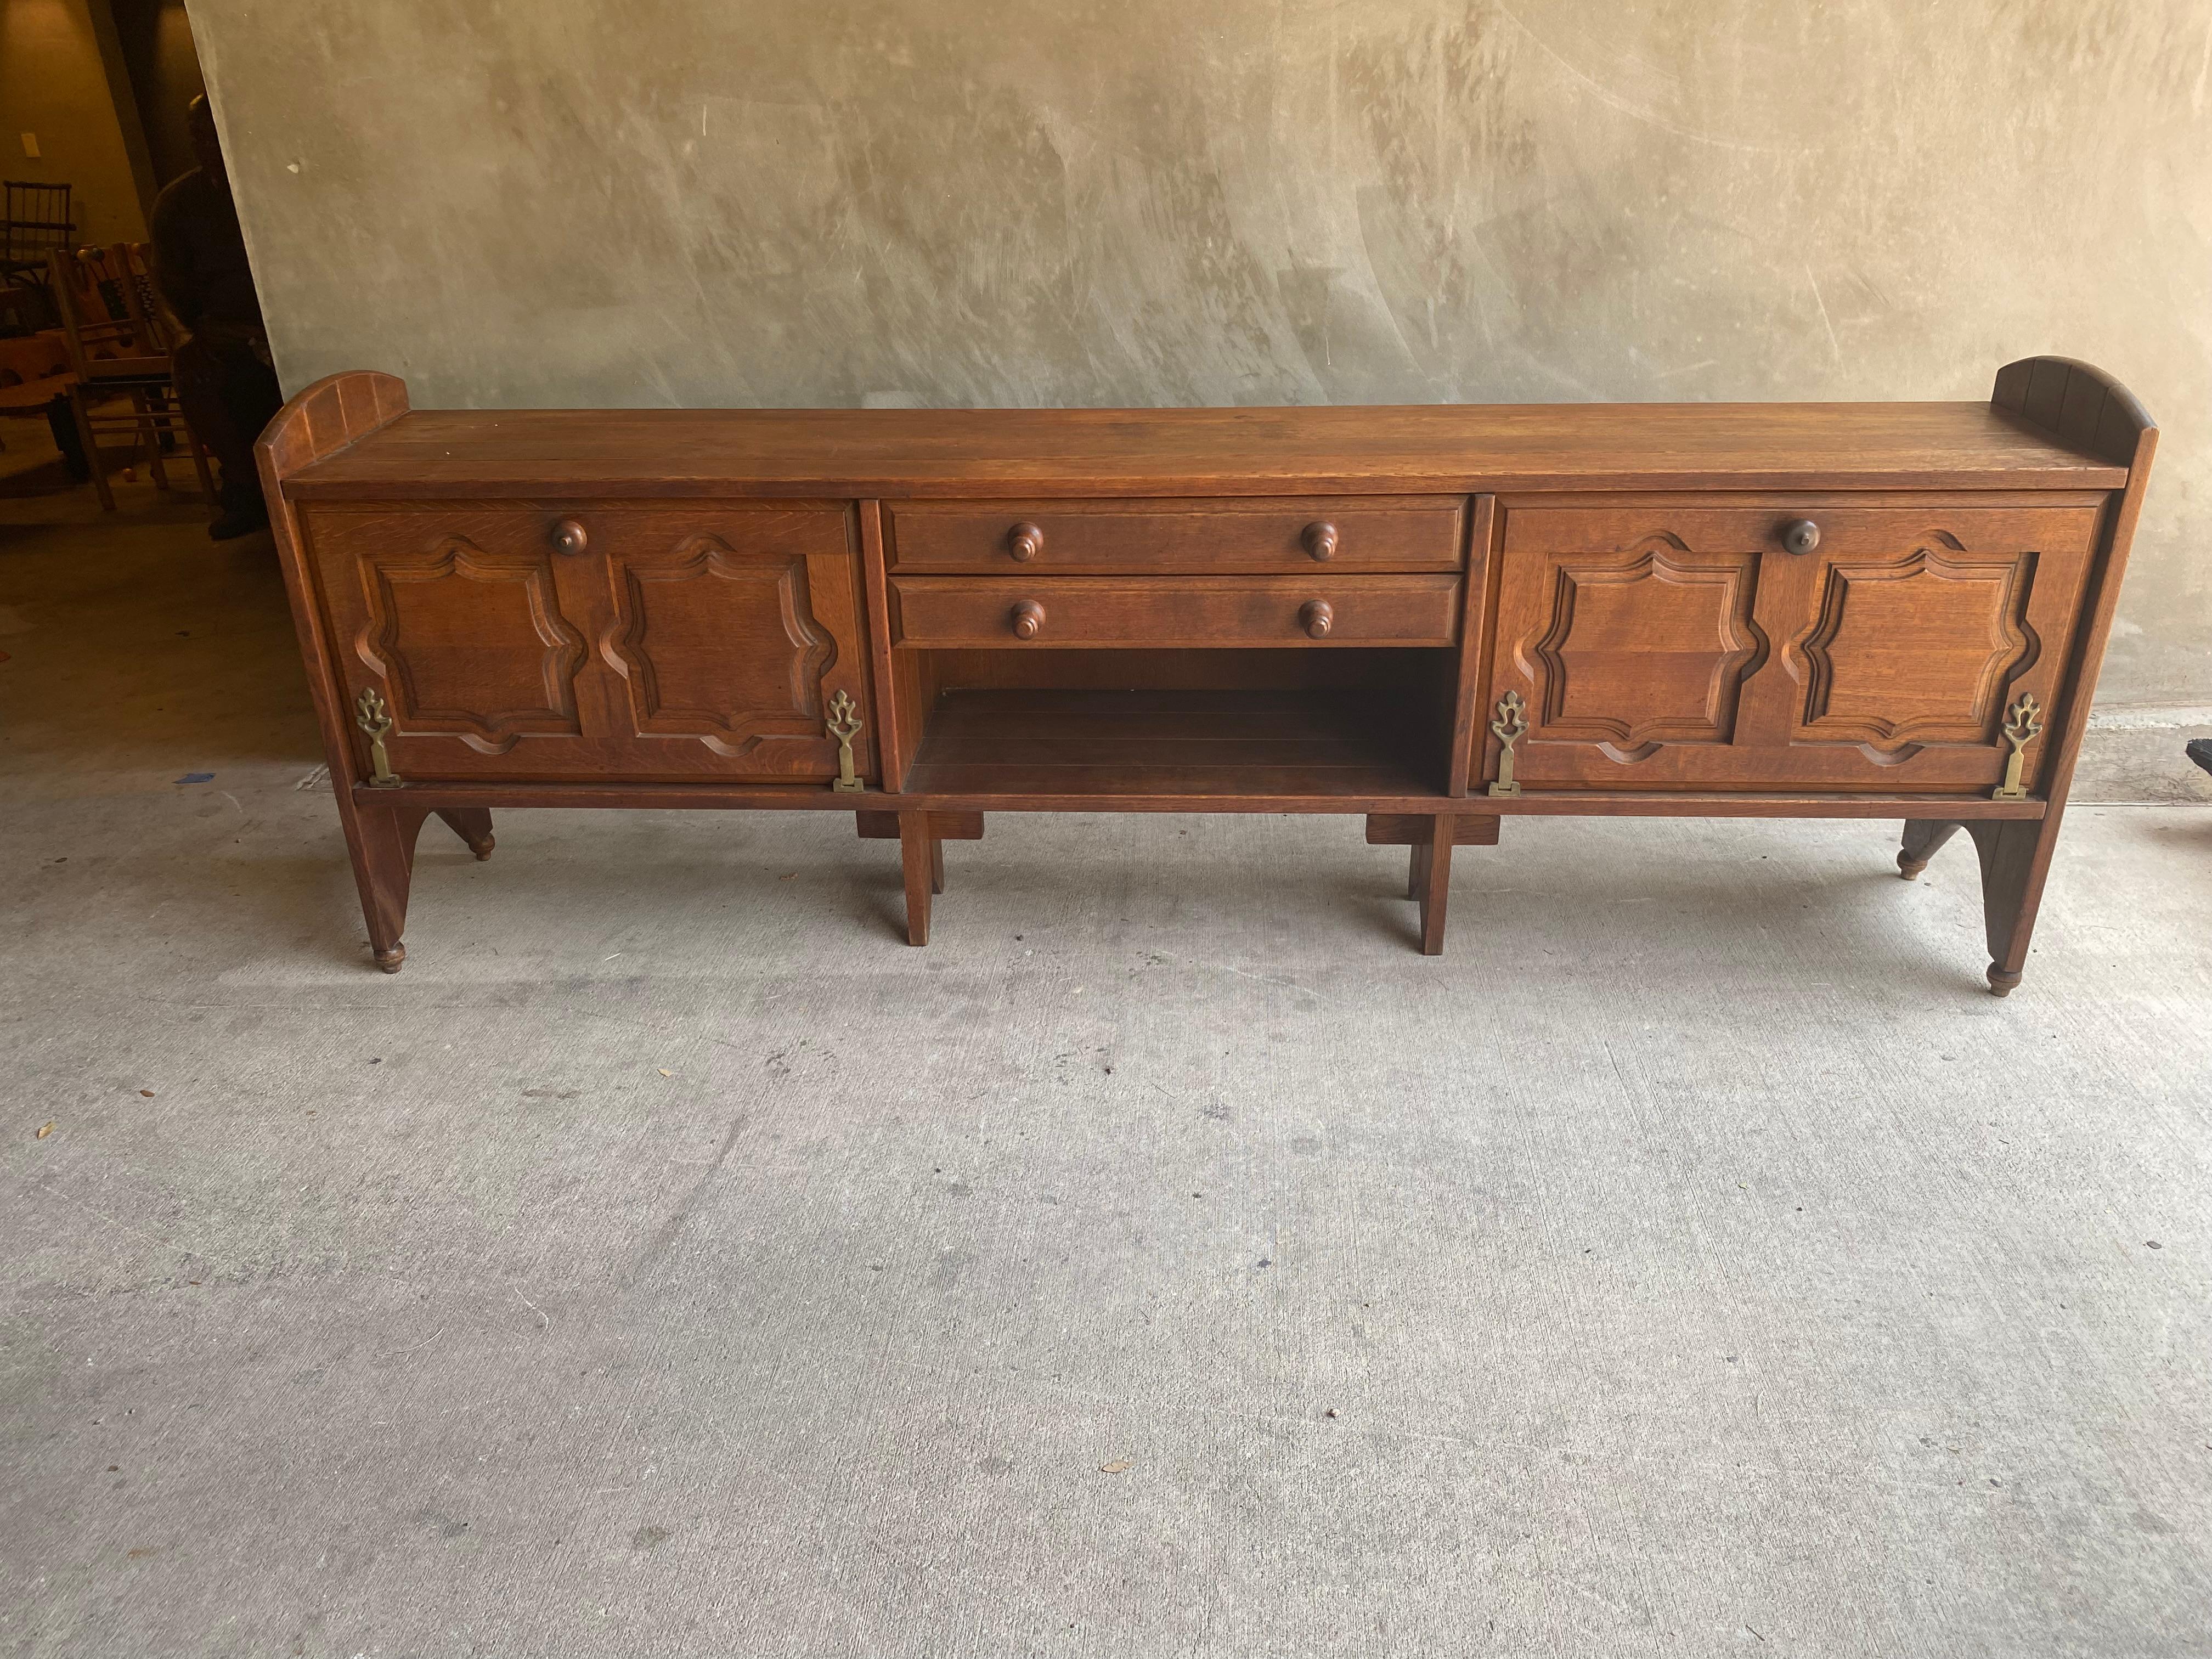 A unique and early piece by midcentury French designers Robert Guillerme and Jacques Chambron. Solid French oak sideboard with drop down compartments and drawer storage. The custom designed hinges and pulls are representative of the whimsey often